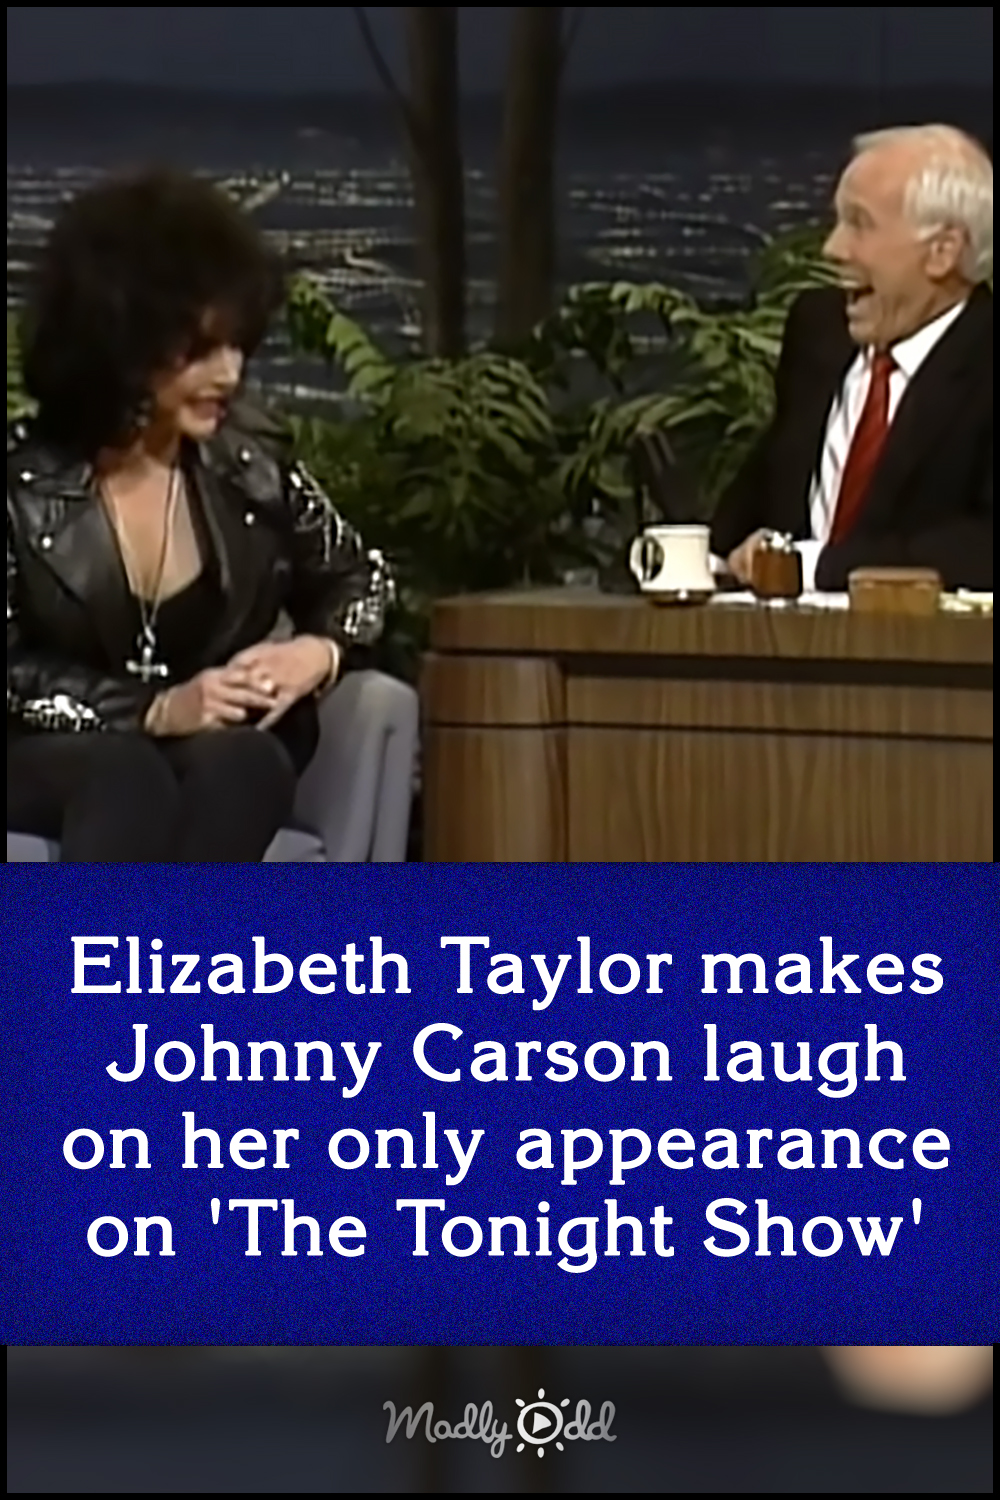 Elizabeth Taylor makes Johnny Carson laugh on her only appearance on \'The Tonight Show\'